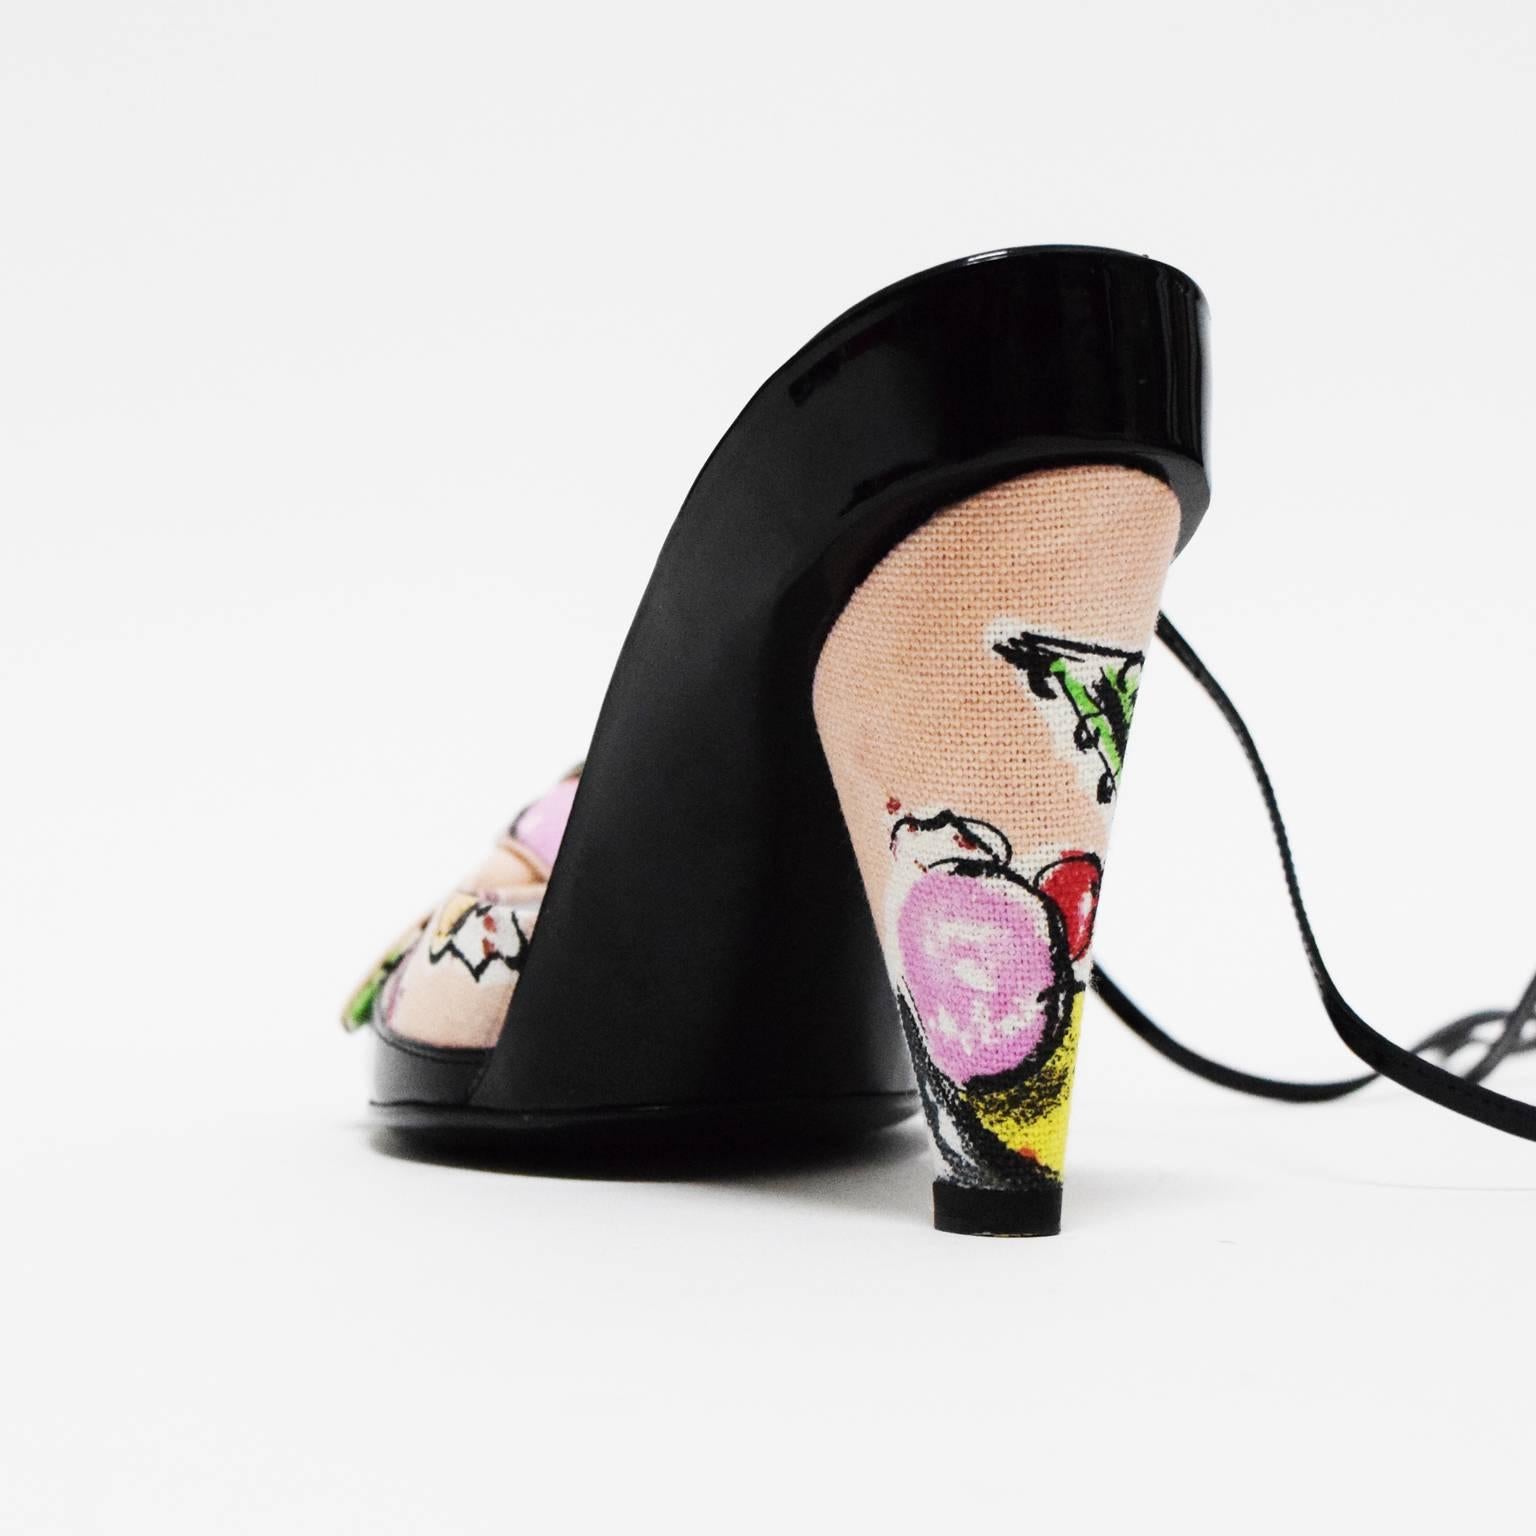 Printed canvas . Black patent leather rounded toe. Leather tie around ankle straps. Upper knotted bow embellishment. 